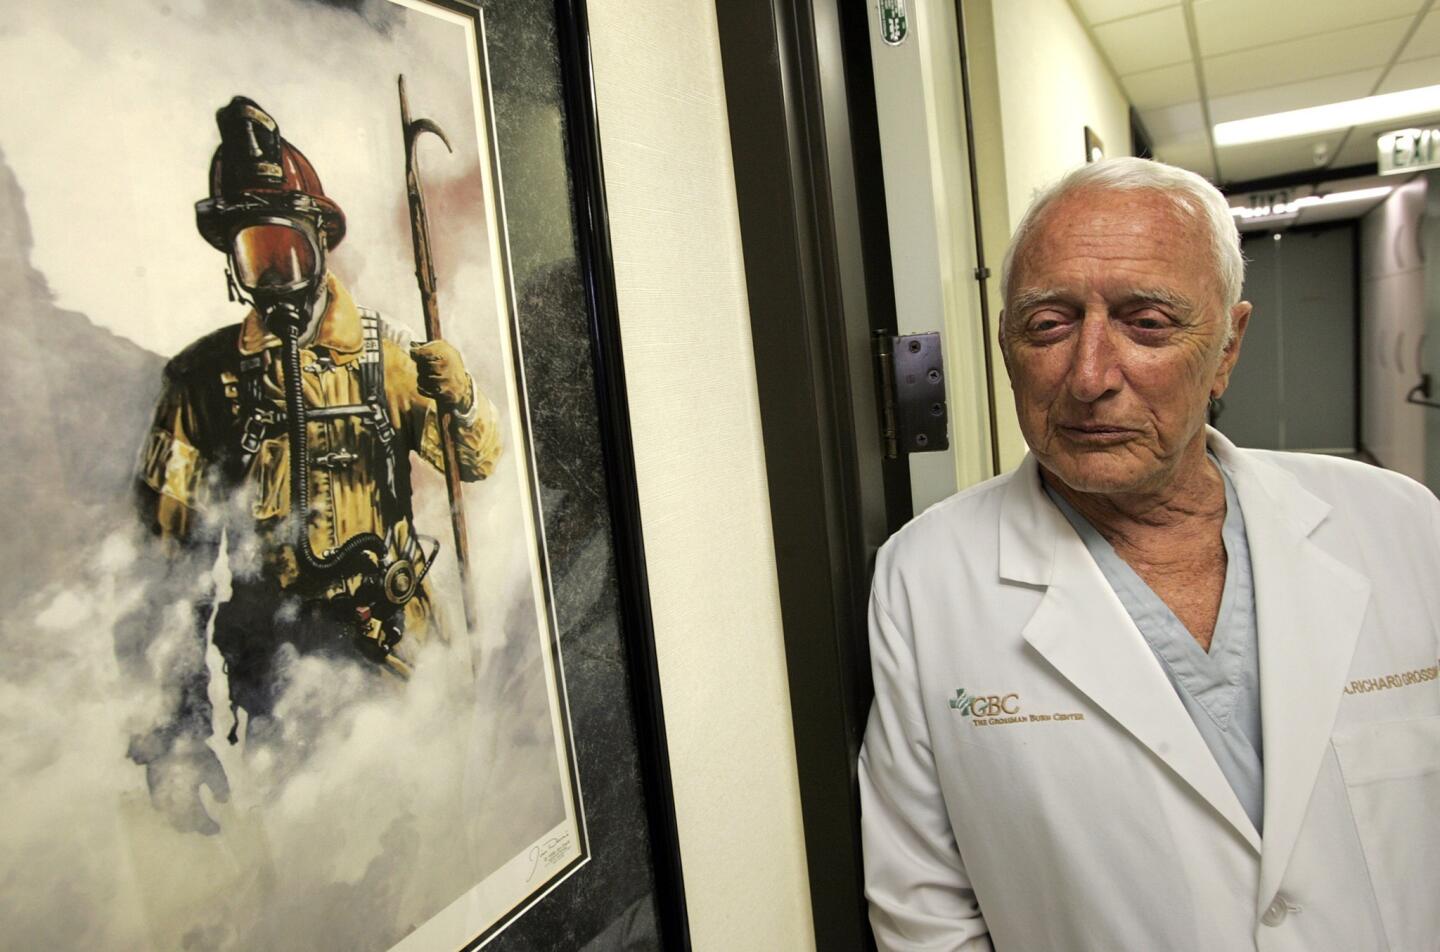 Dr. A. Richard Grossman, founder and co-medical director of the Grossman Burn Center in Sherman Oaks, is photographed in the hallway of his office in 2009.